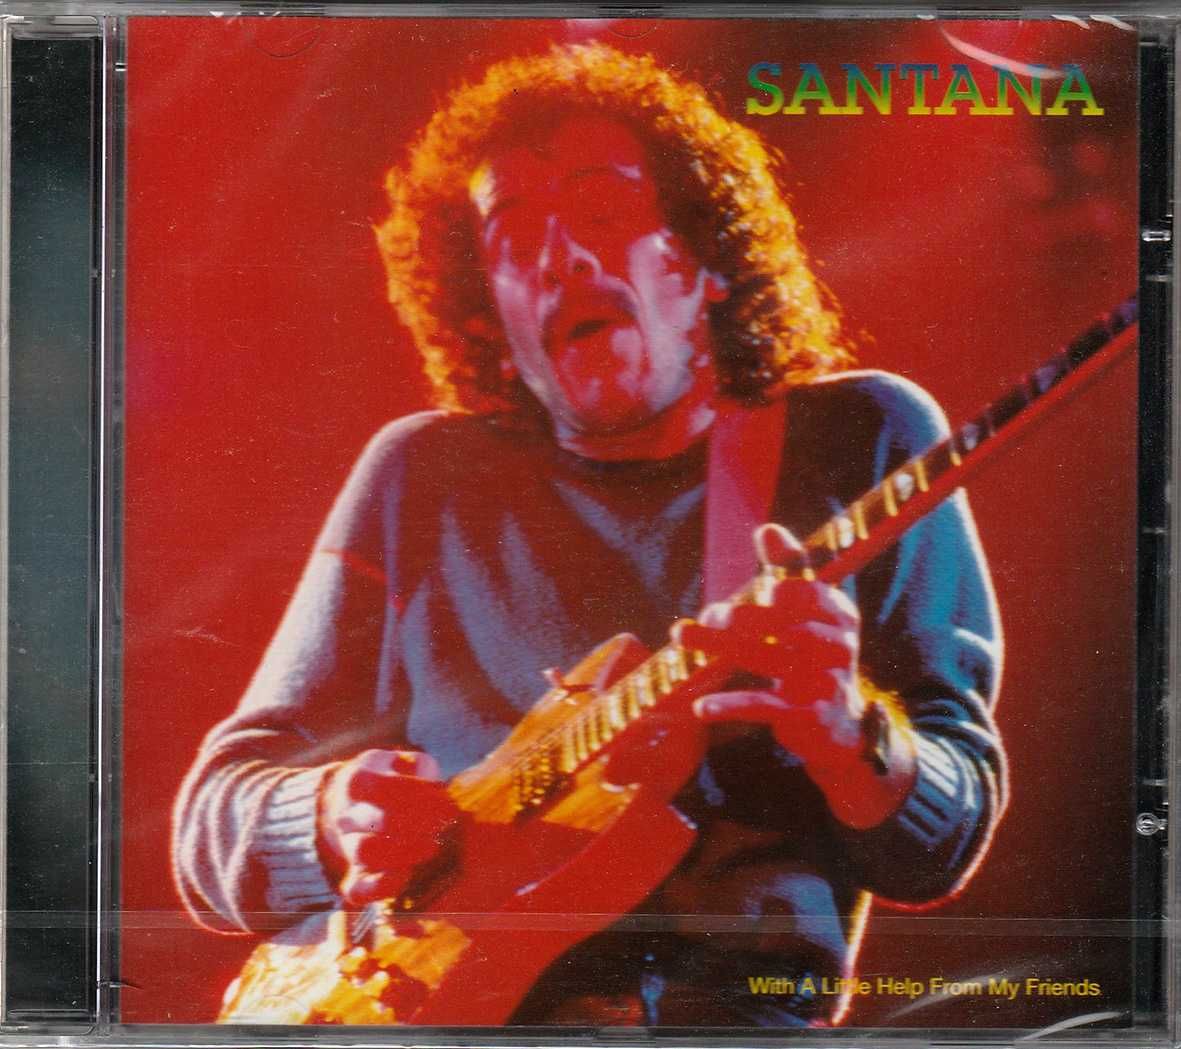 CD Santana - With A Little Help From My Friends